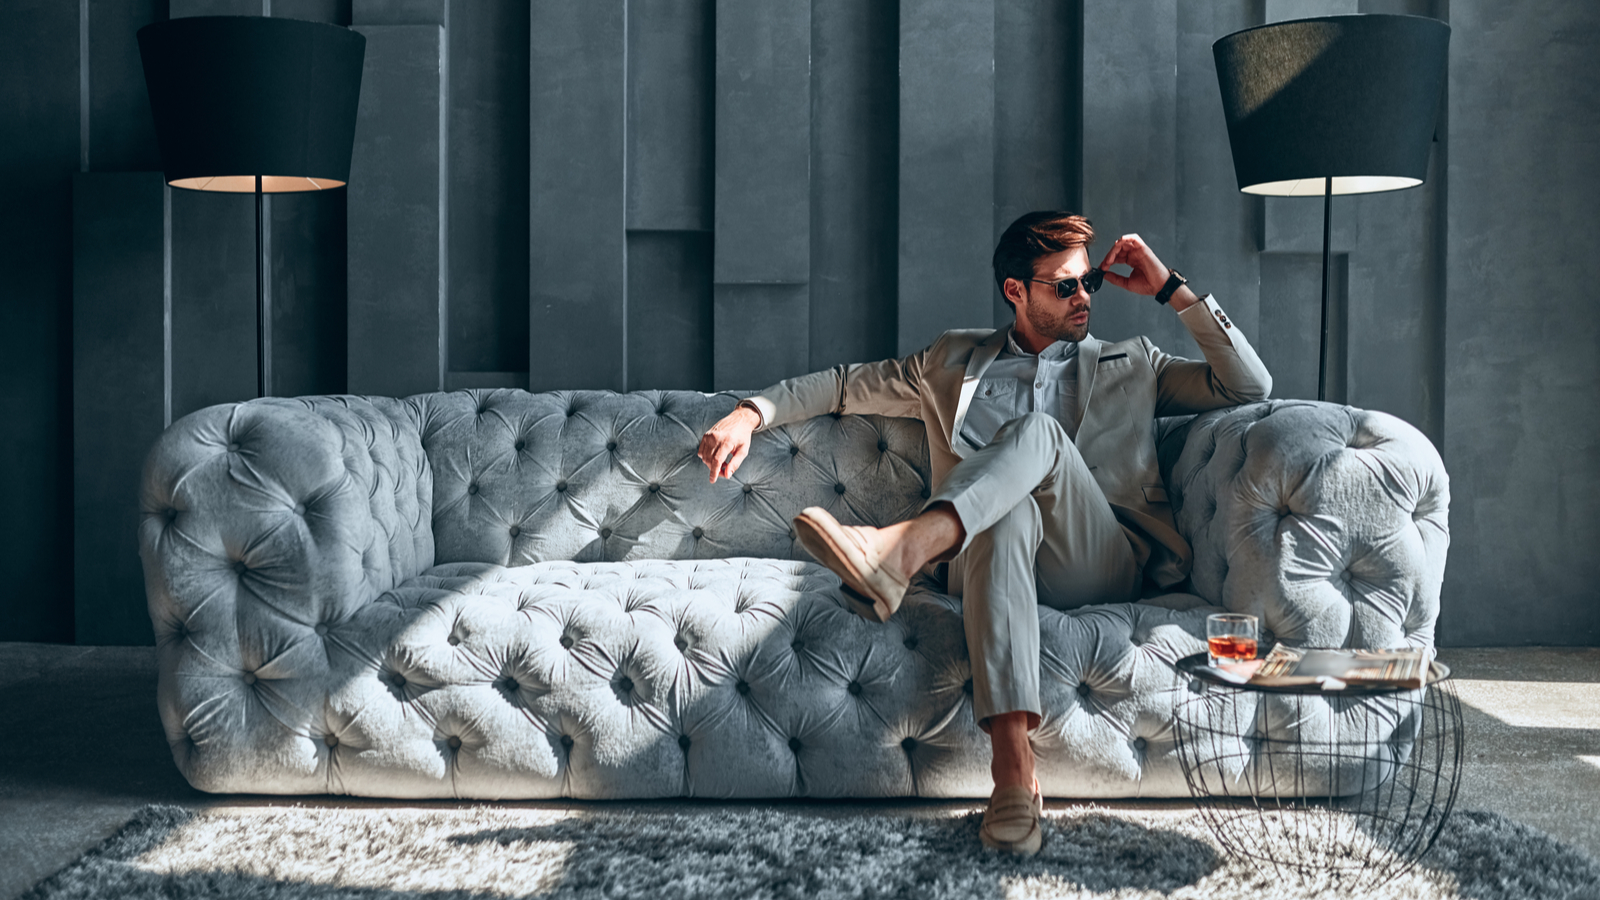 SECO Stock. luxury resale stocks Handsome stylish man in beige suit at home sitting on sofa